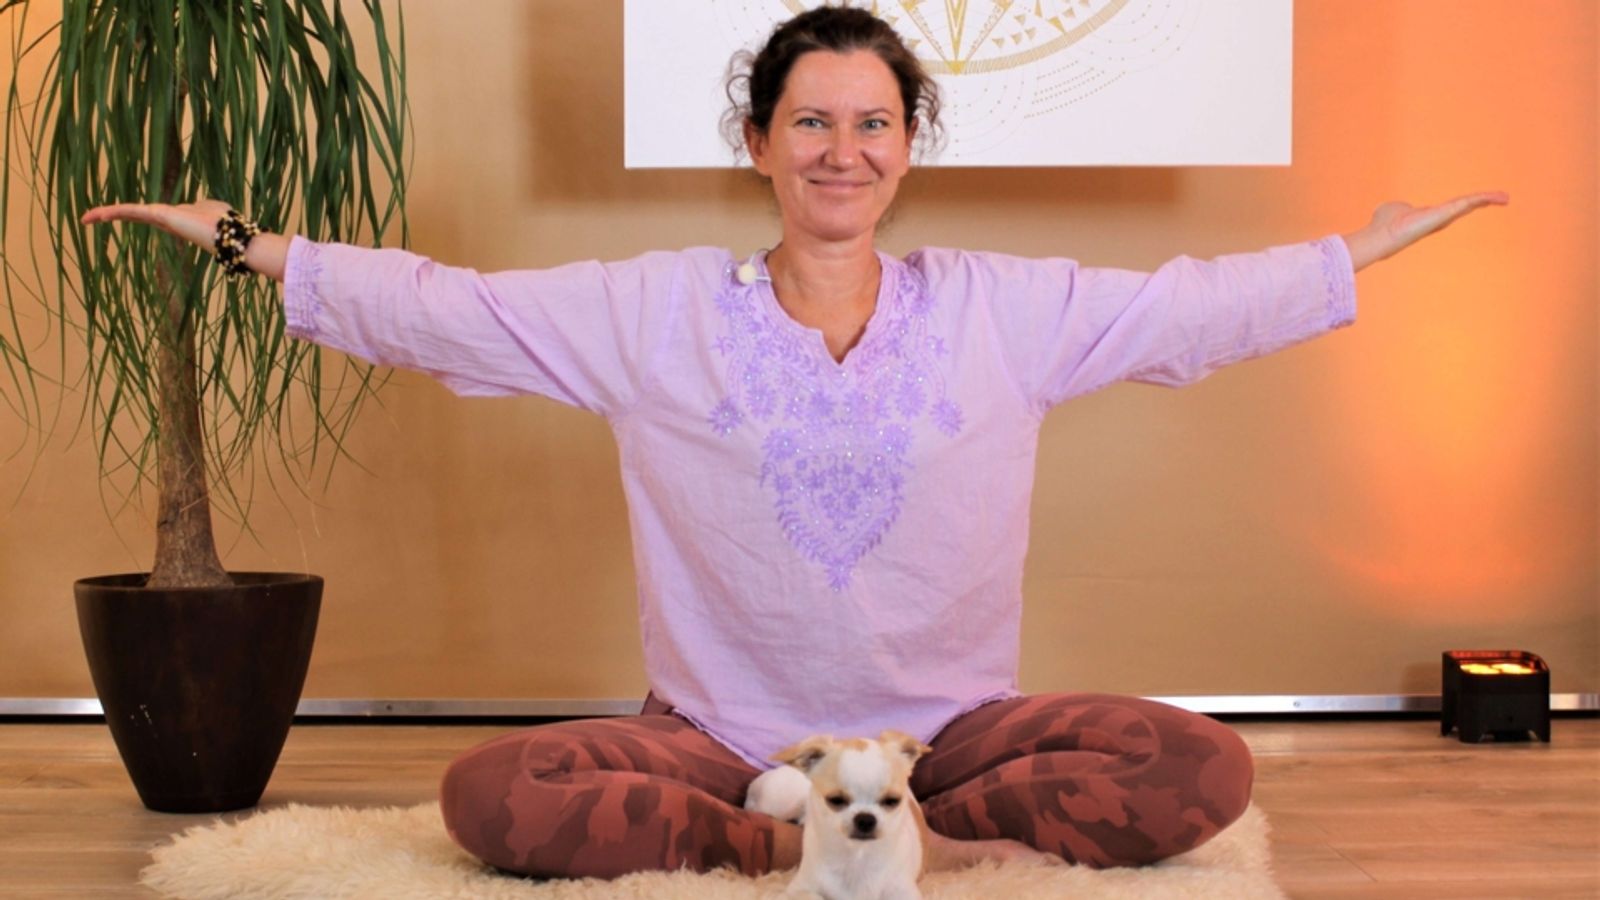 Kriya to generate Chi - Move your energy through your body mind system